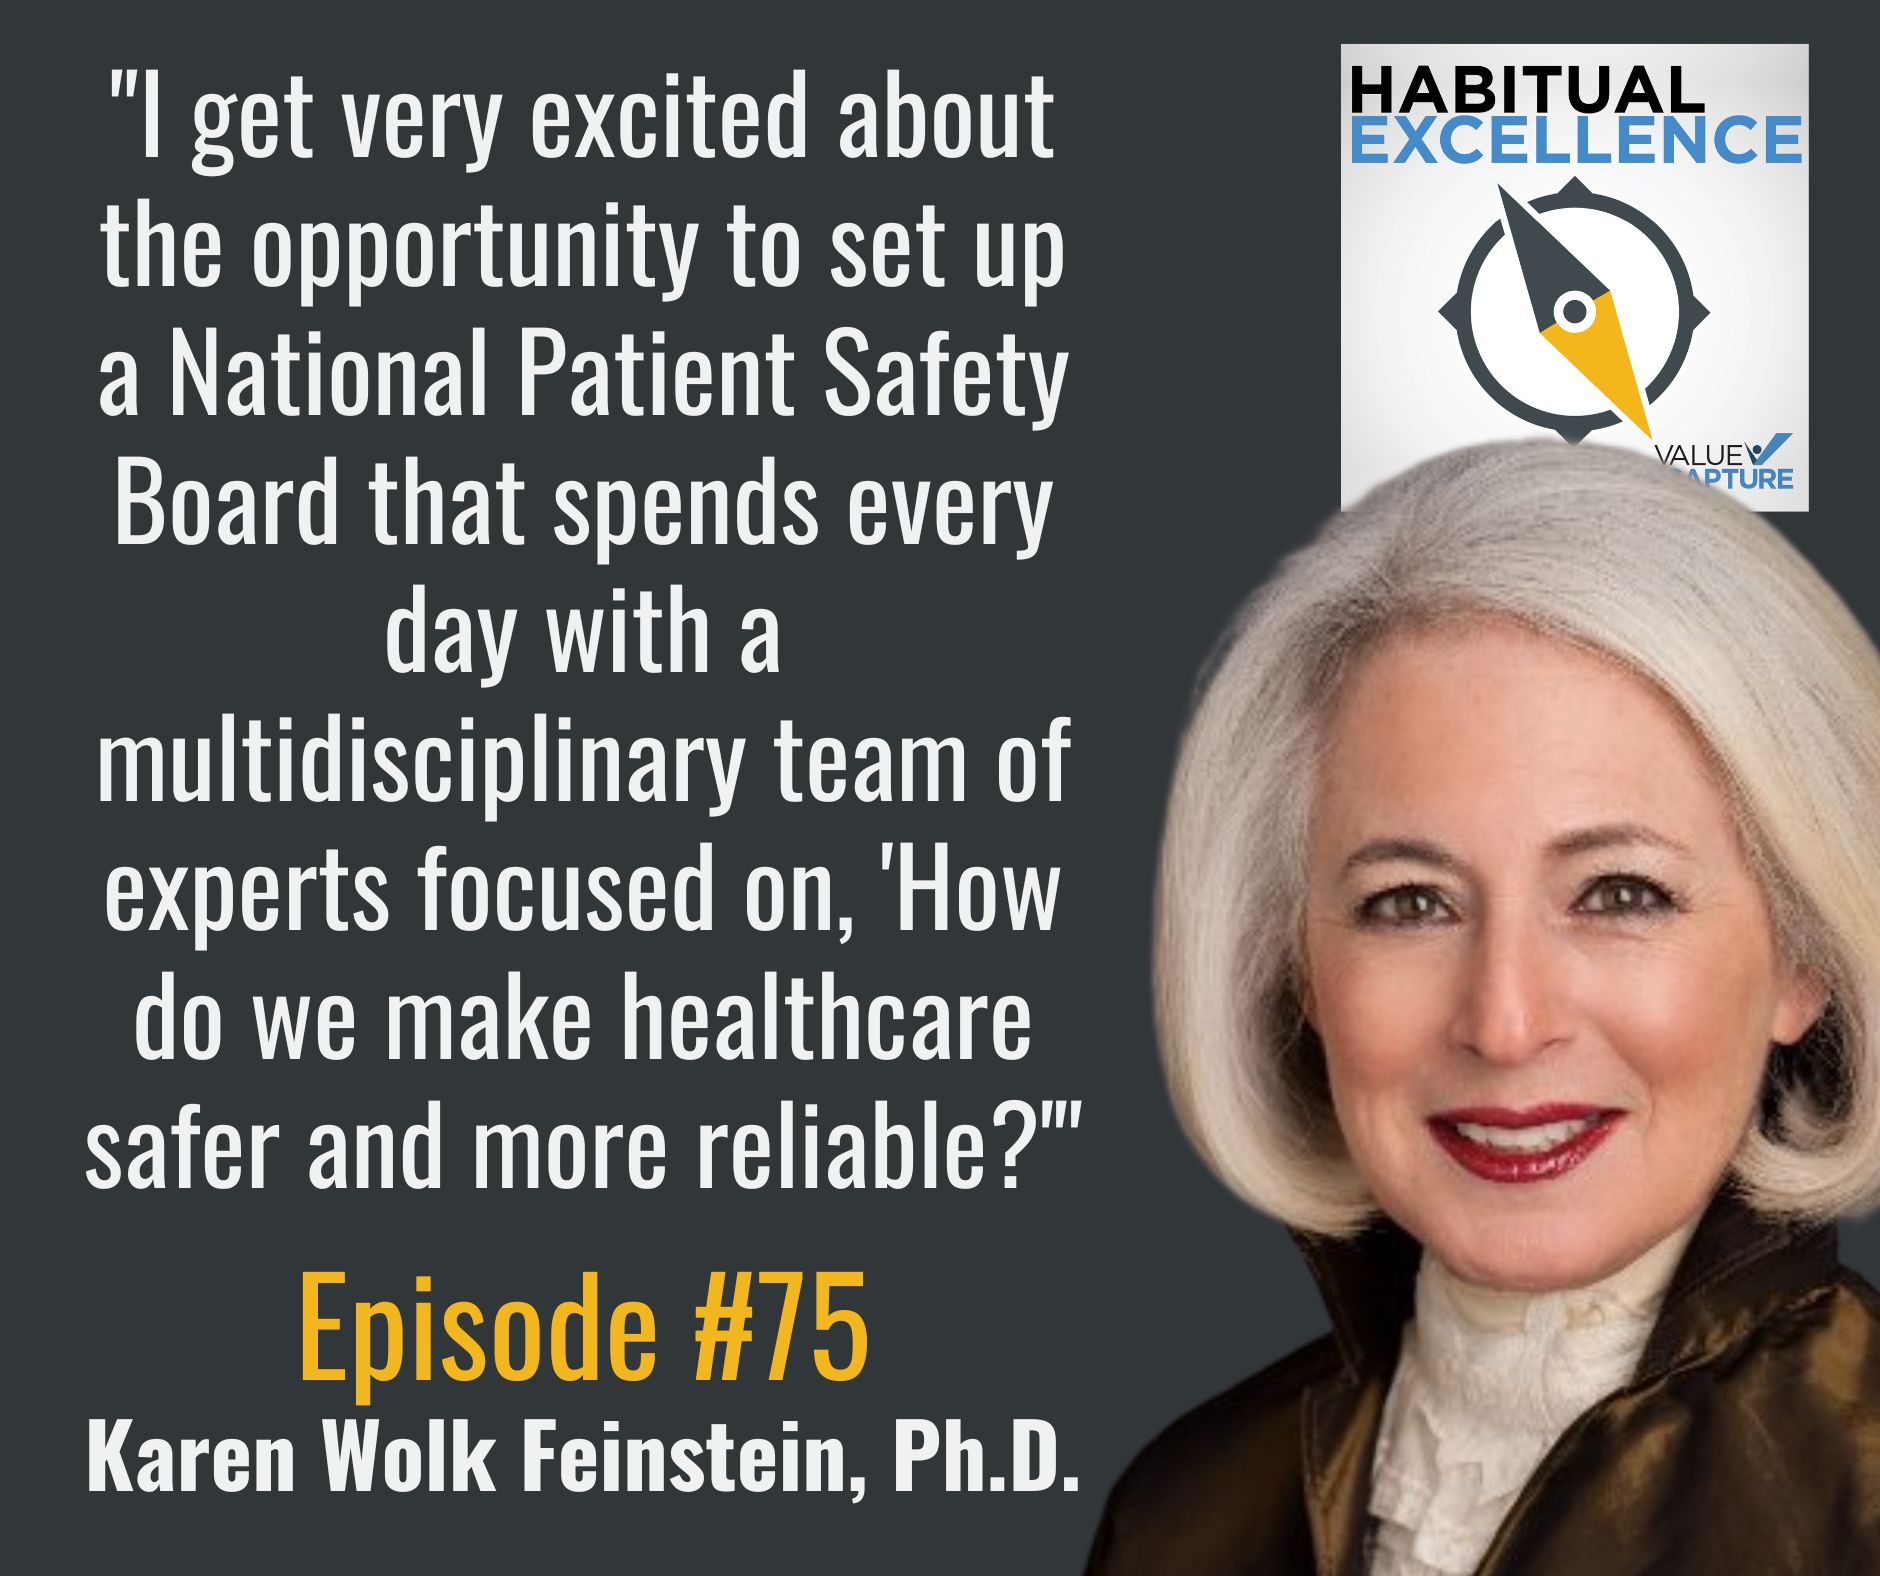 "I get very excited about the opportunity to set up a National Patient Safety Board that spends every day with a multidisciplinary team of experts focused on, 'How do we make healthcare safer and more reliable?'" Karen Wolk Feinstein